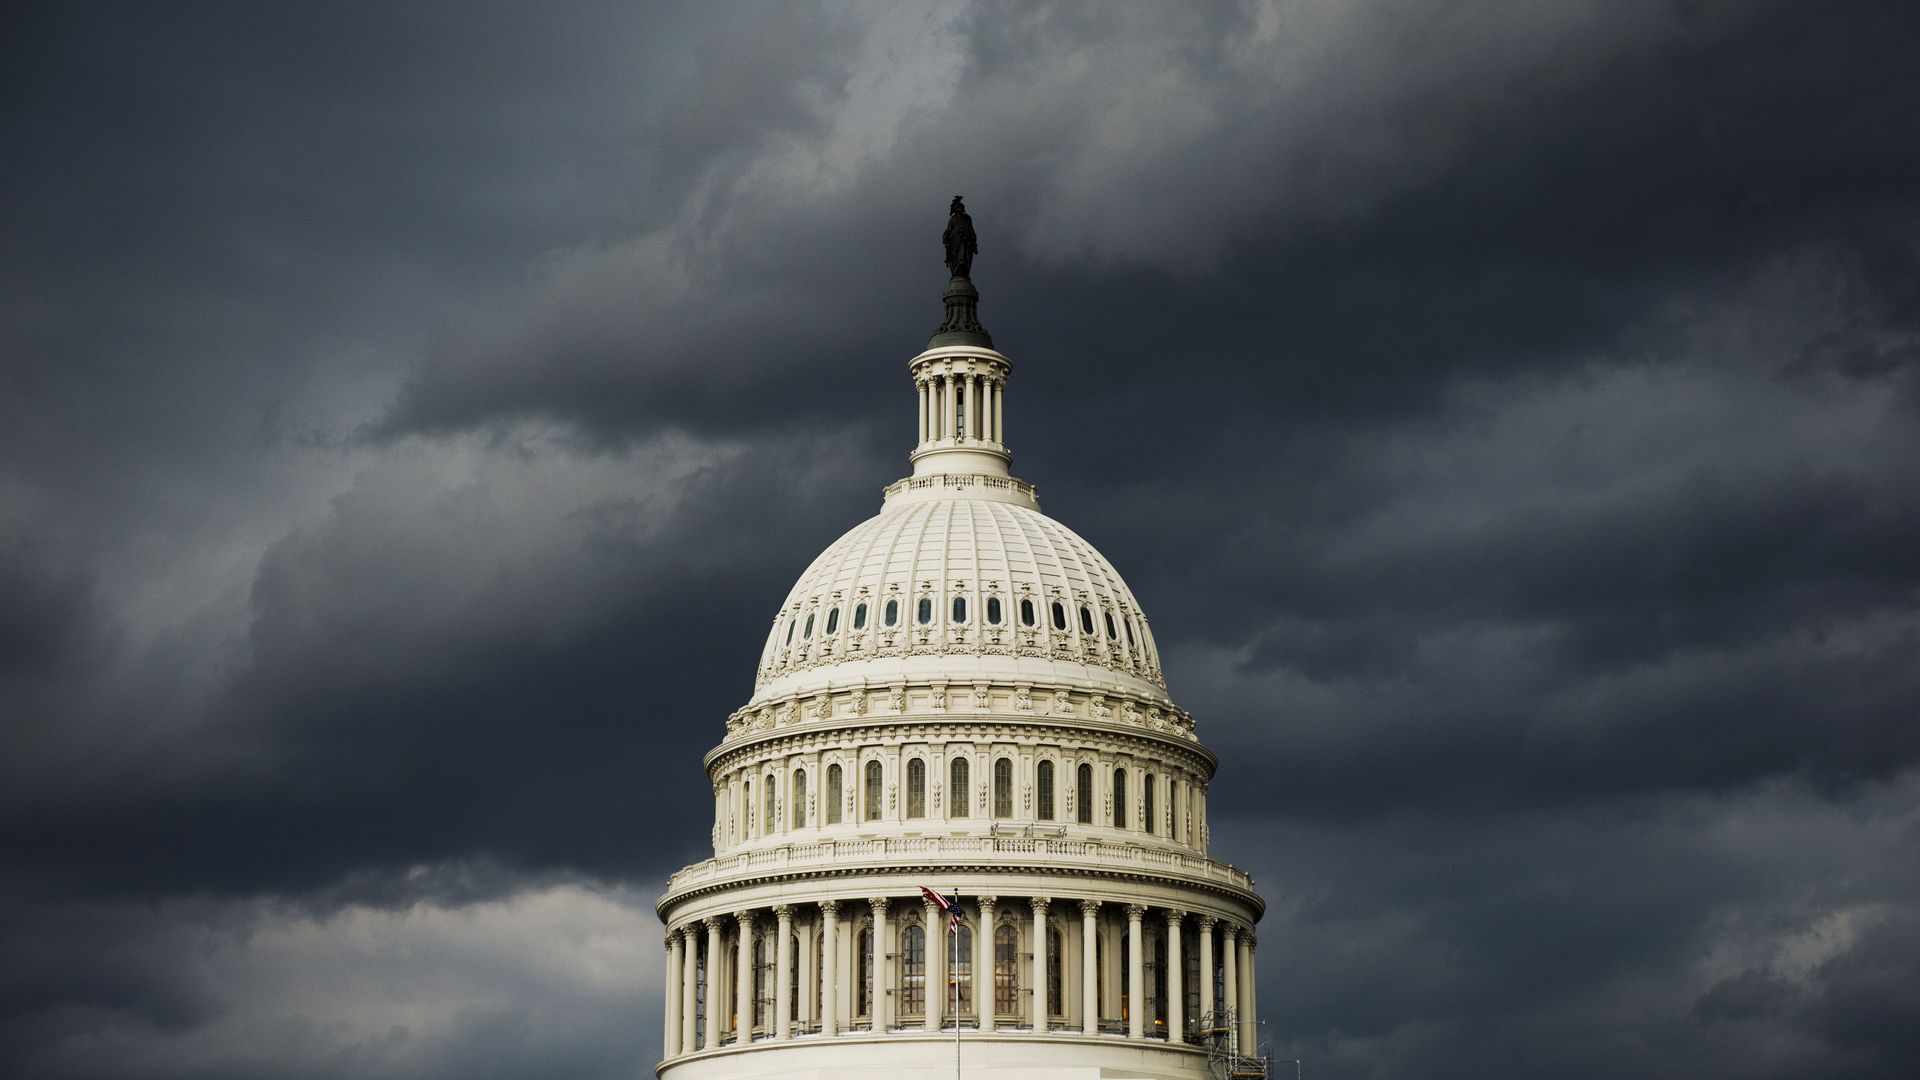 The Capitol Dome under storm clouds